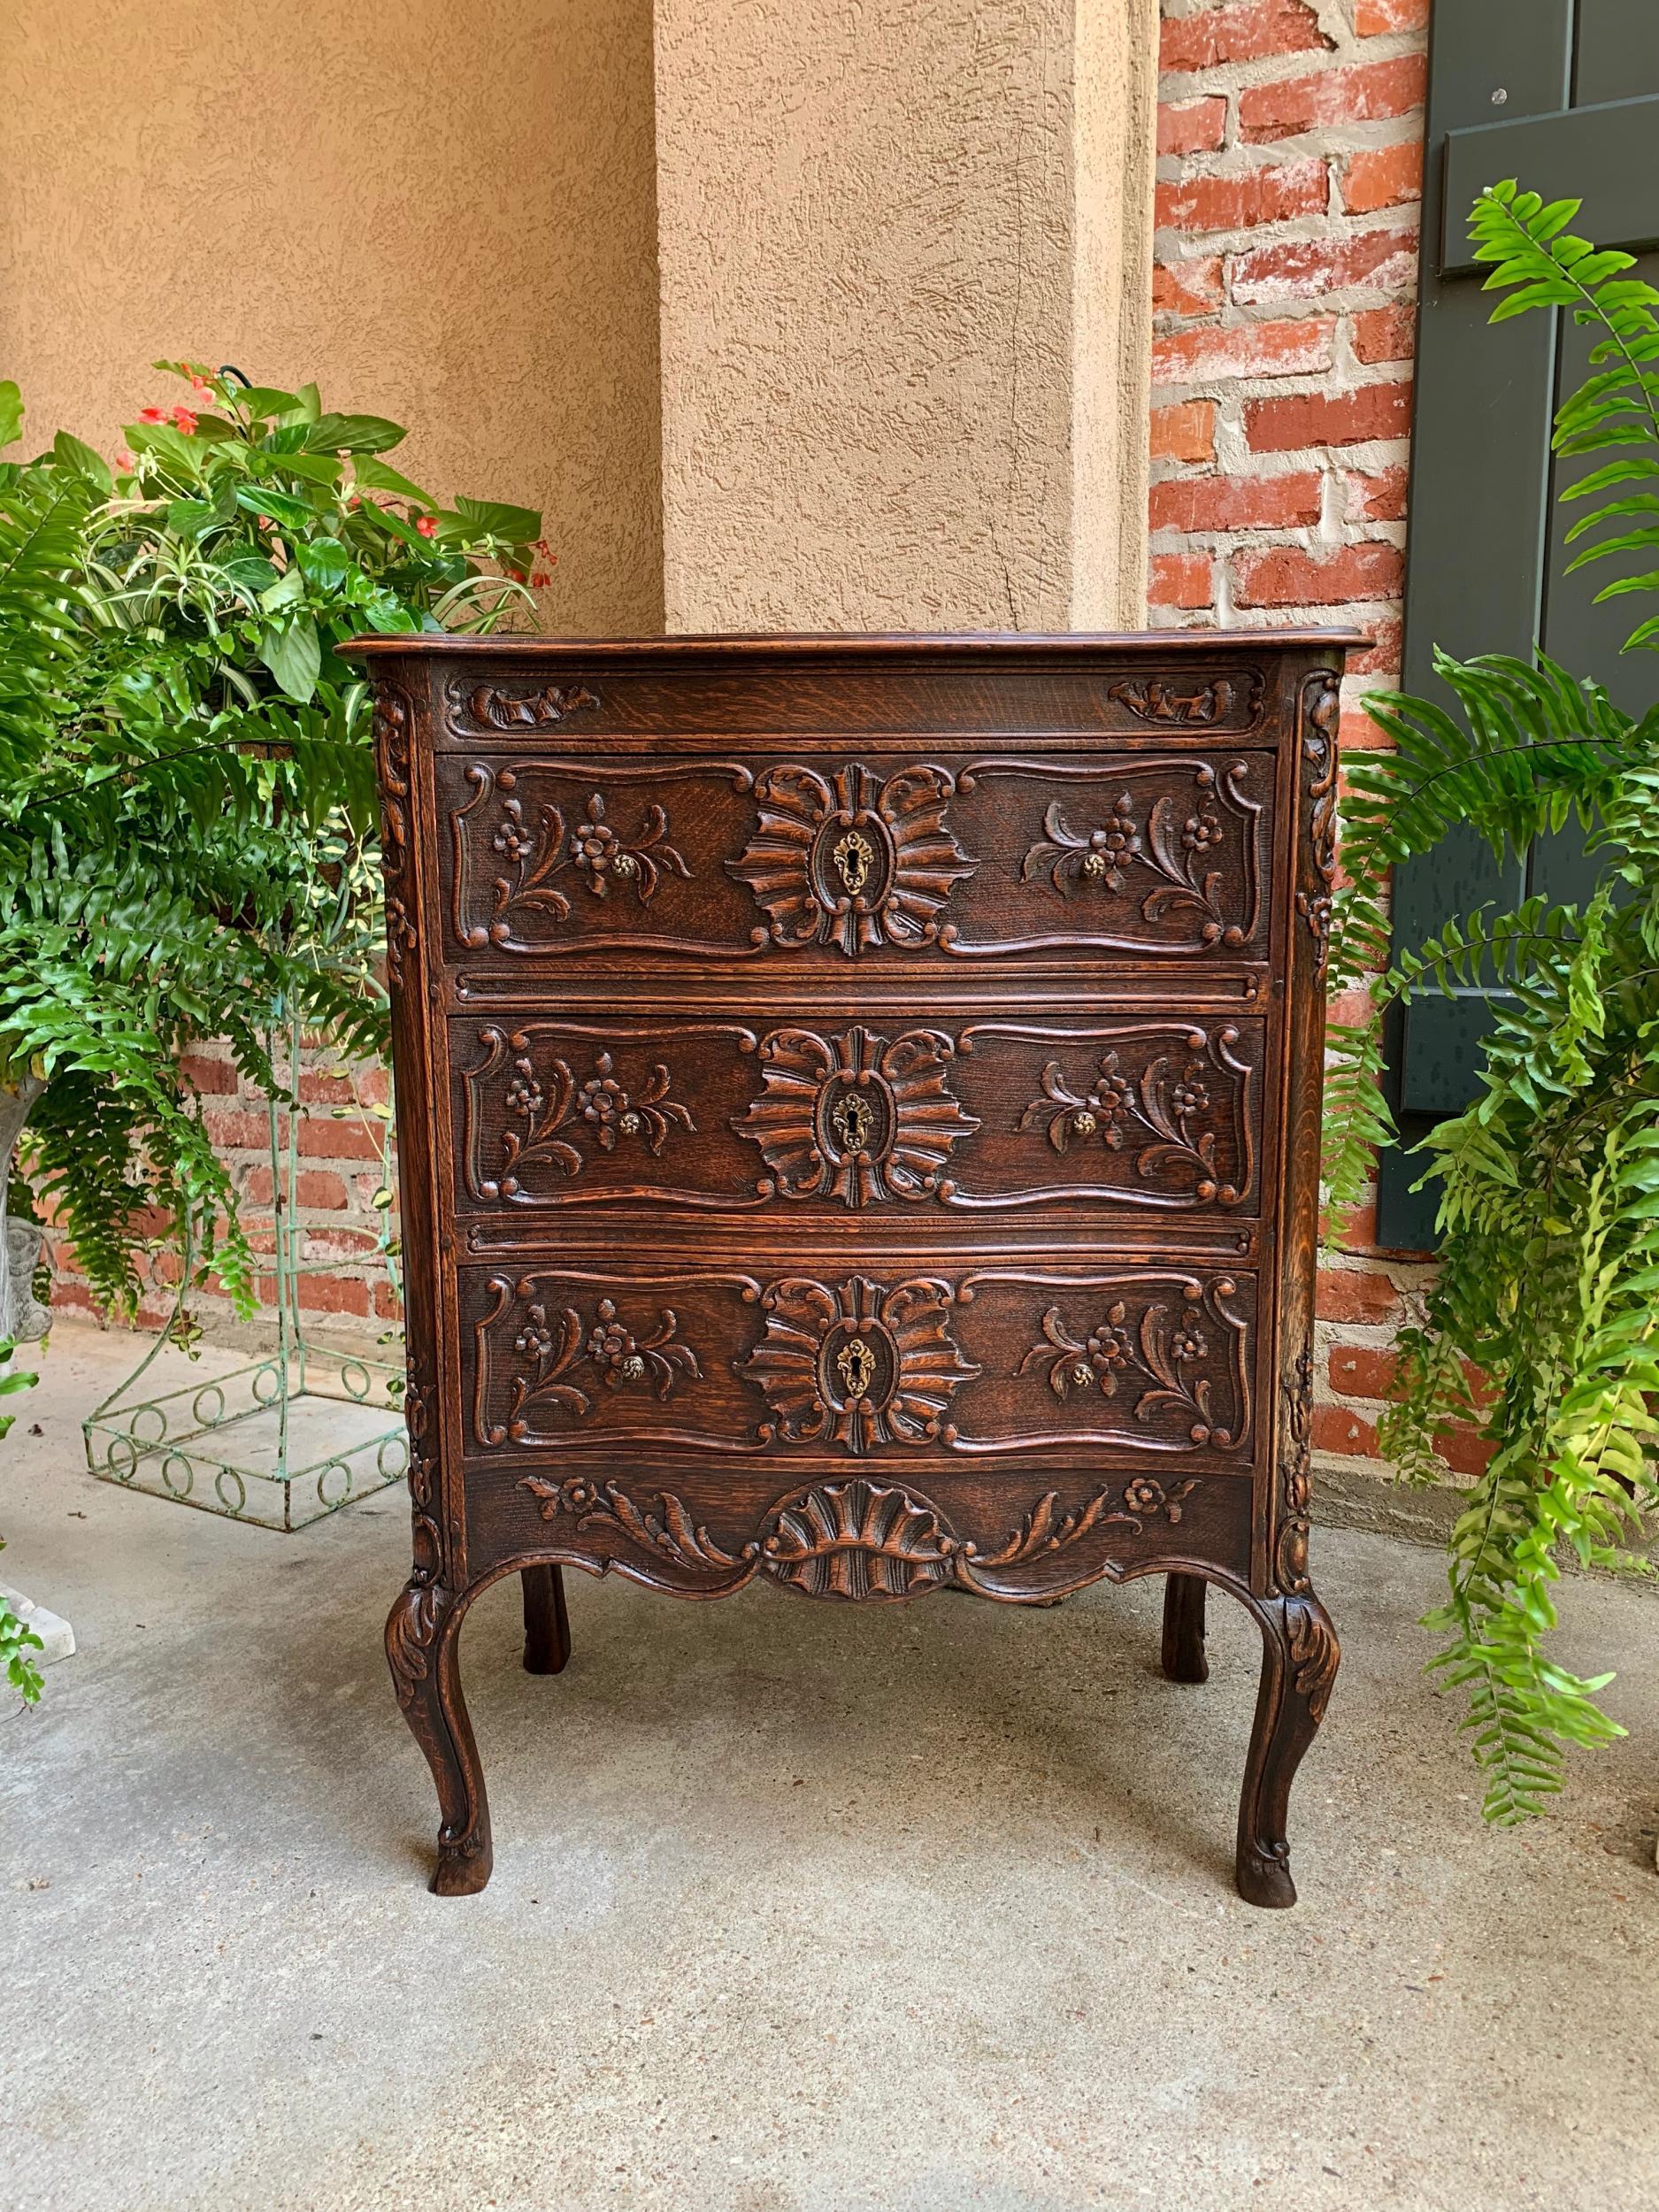 Antique French carved oak commode chest of drawers table Louis XV style nightstand

~Direct from France~
~Lovely antique French chest with a great combination of size, style and construction!~
~Serpentine front and cabriole legs create a